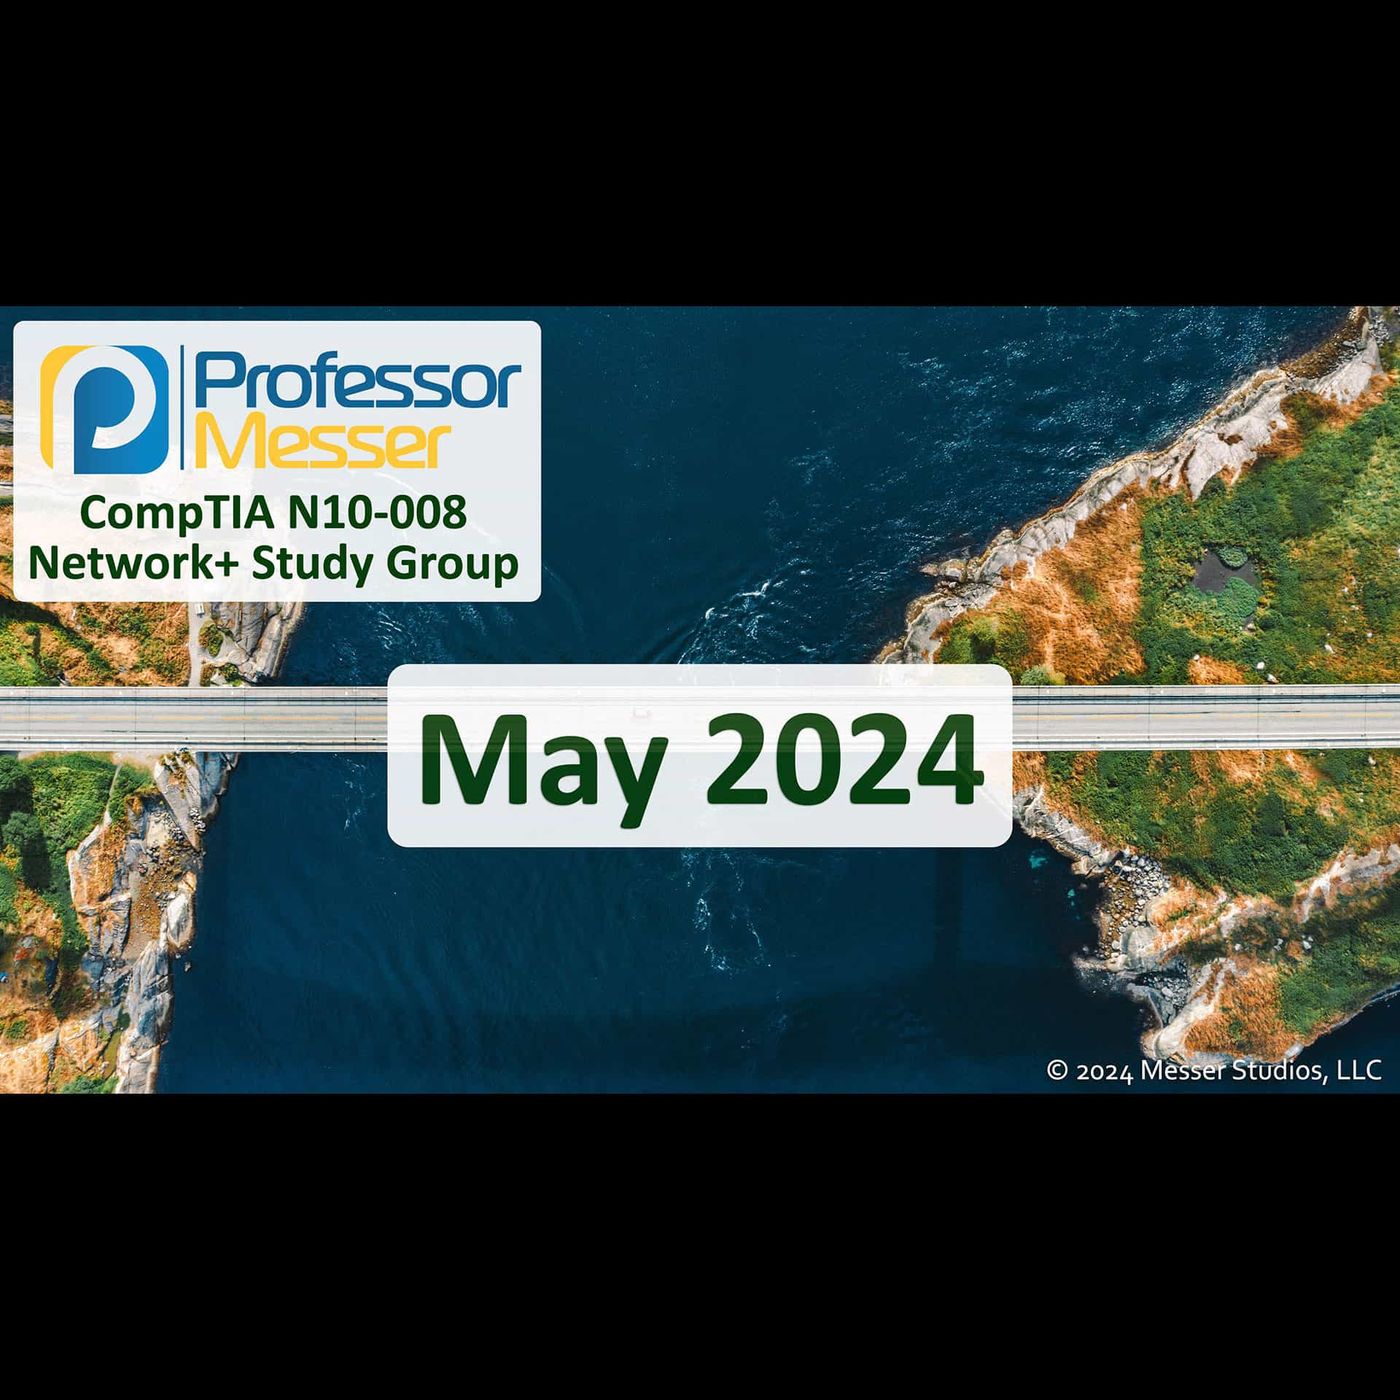 Professor Messer's N10-008 Network+ Study Group - May 2024